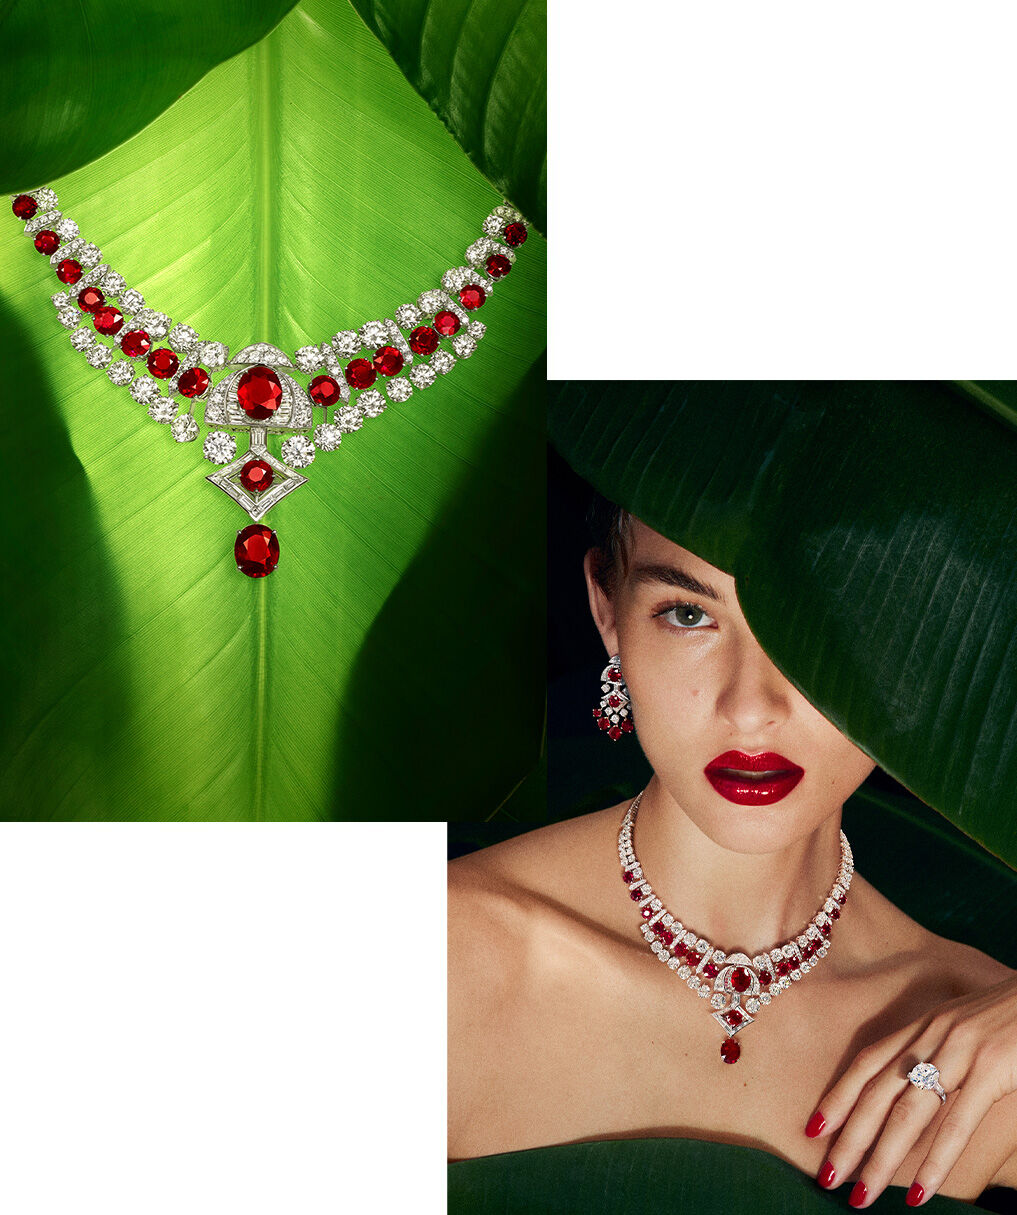 Side by side images of Graff high jewellery Ruby and White diamond necklace and model wearing Graff high jewellery ruby and diamond suite